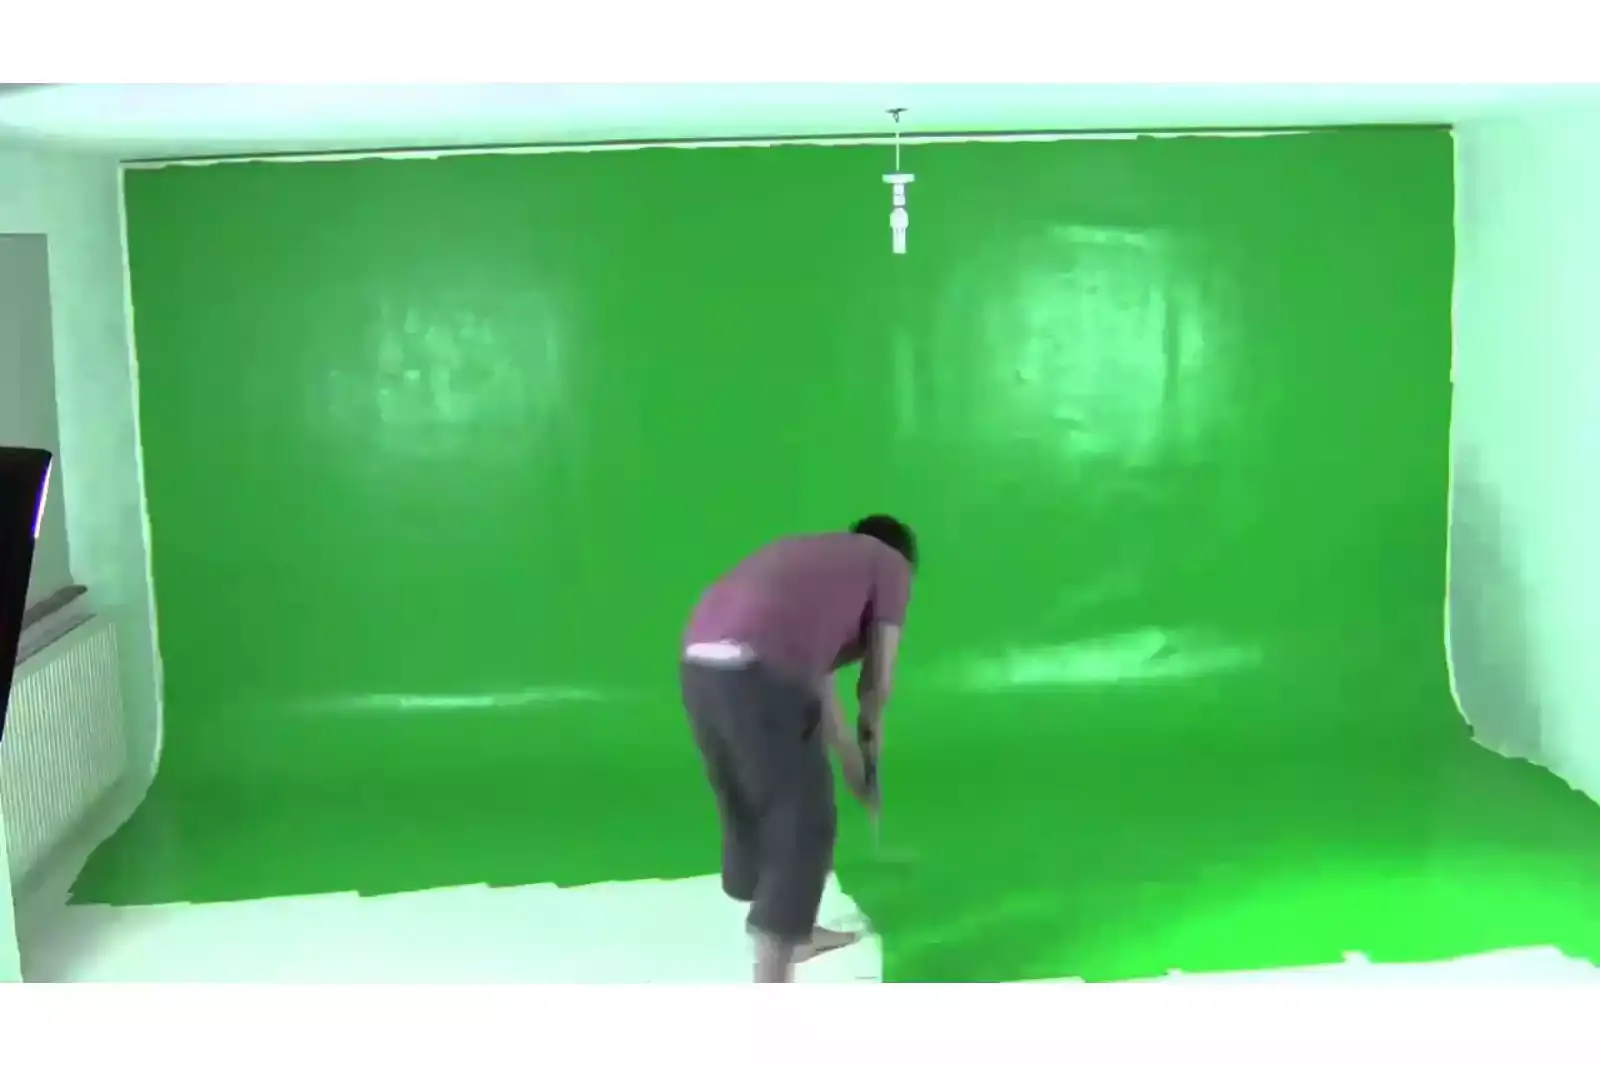 3. DIY Green Screen With Green Paint